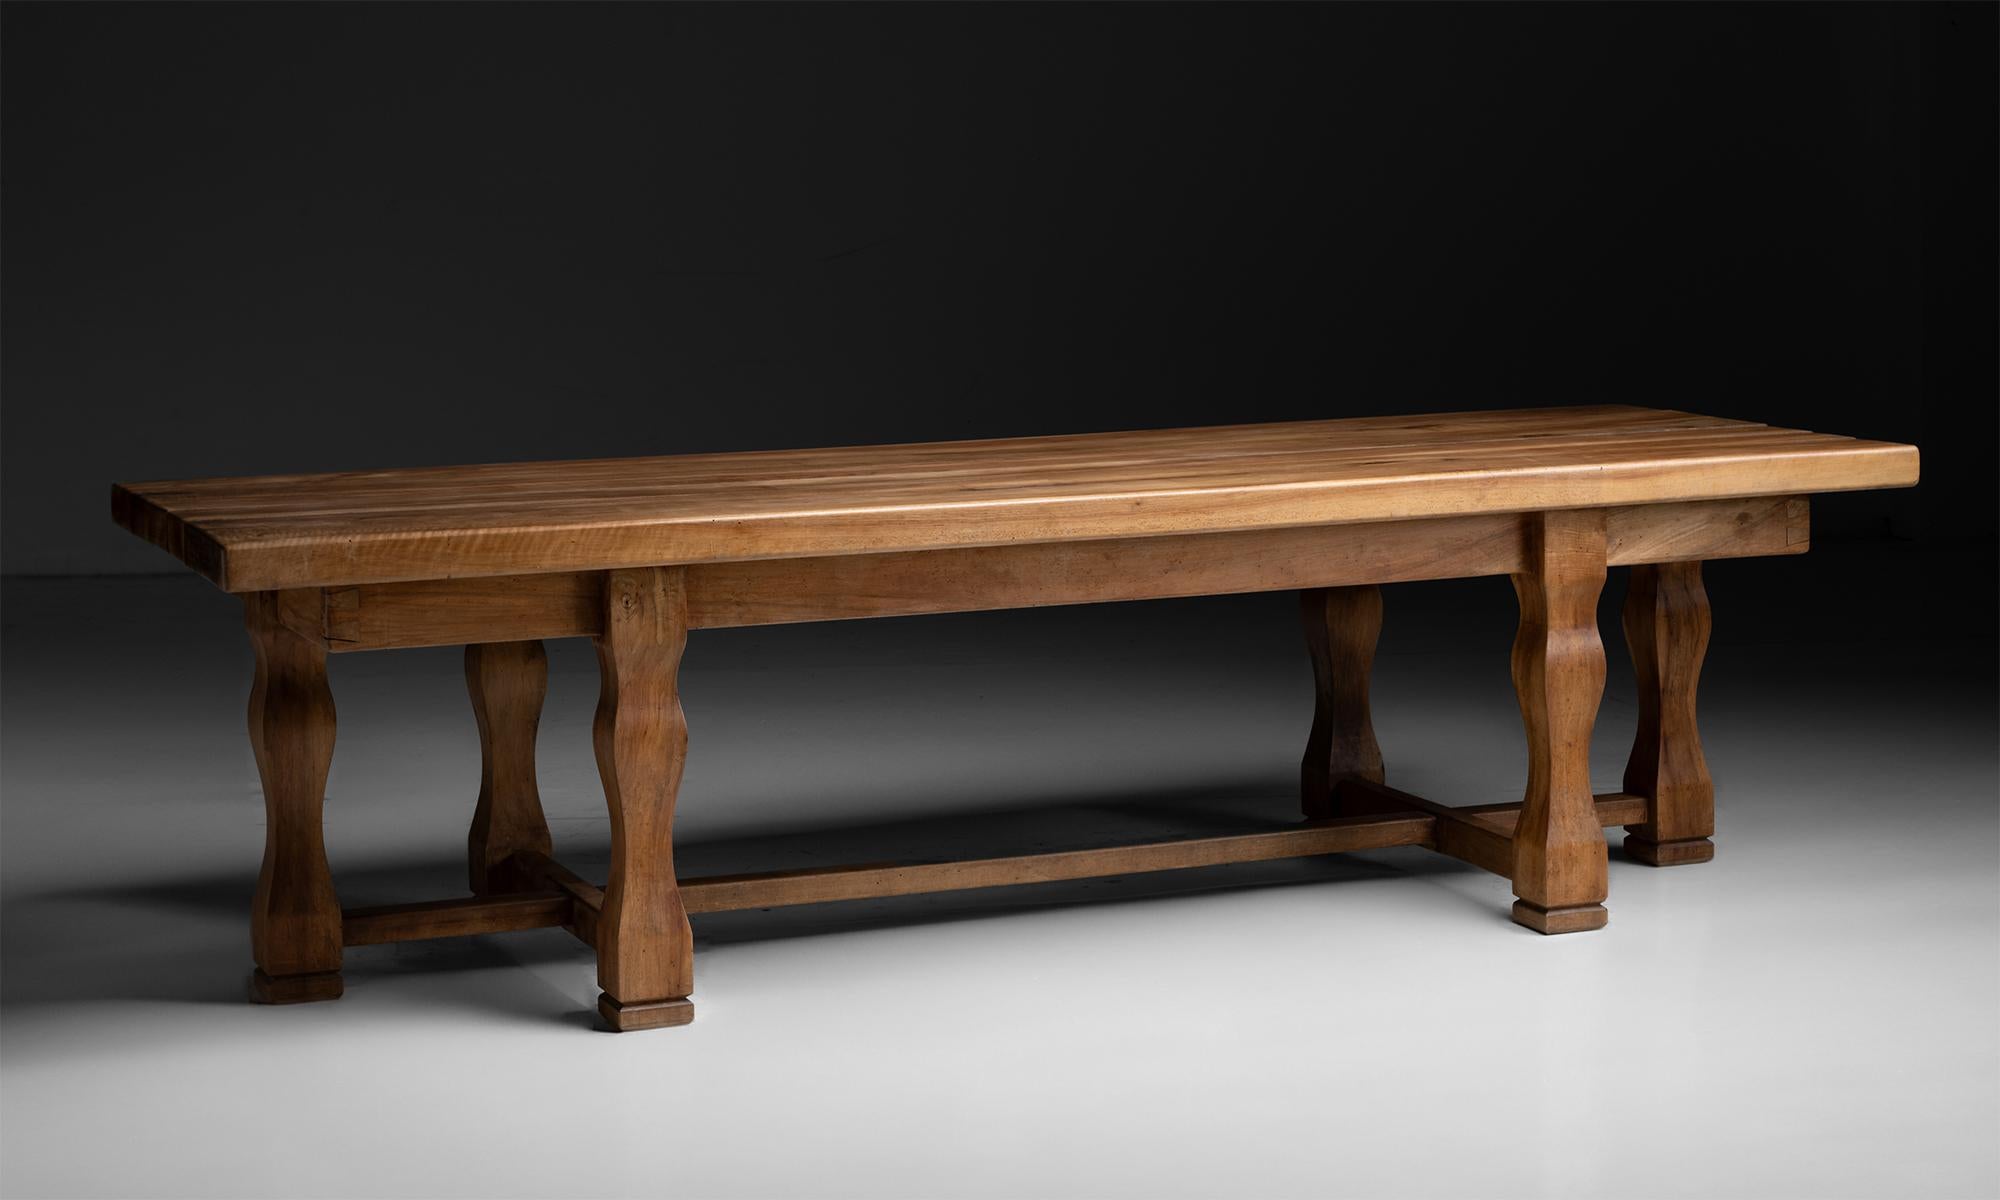 Walnut Refectory Table

England 1972

Unique form, 6 carved legs with stretcher and thick plank top.

107”L x 37.5”d x 29.5”h